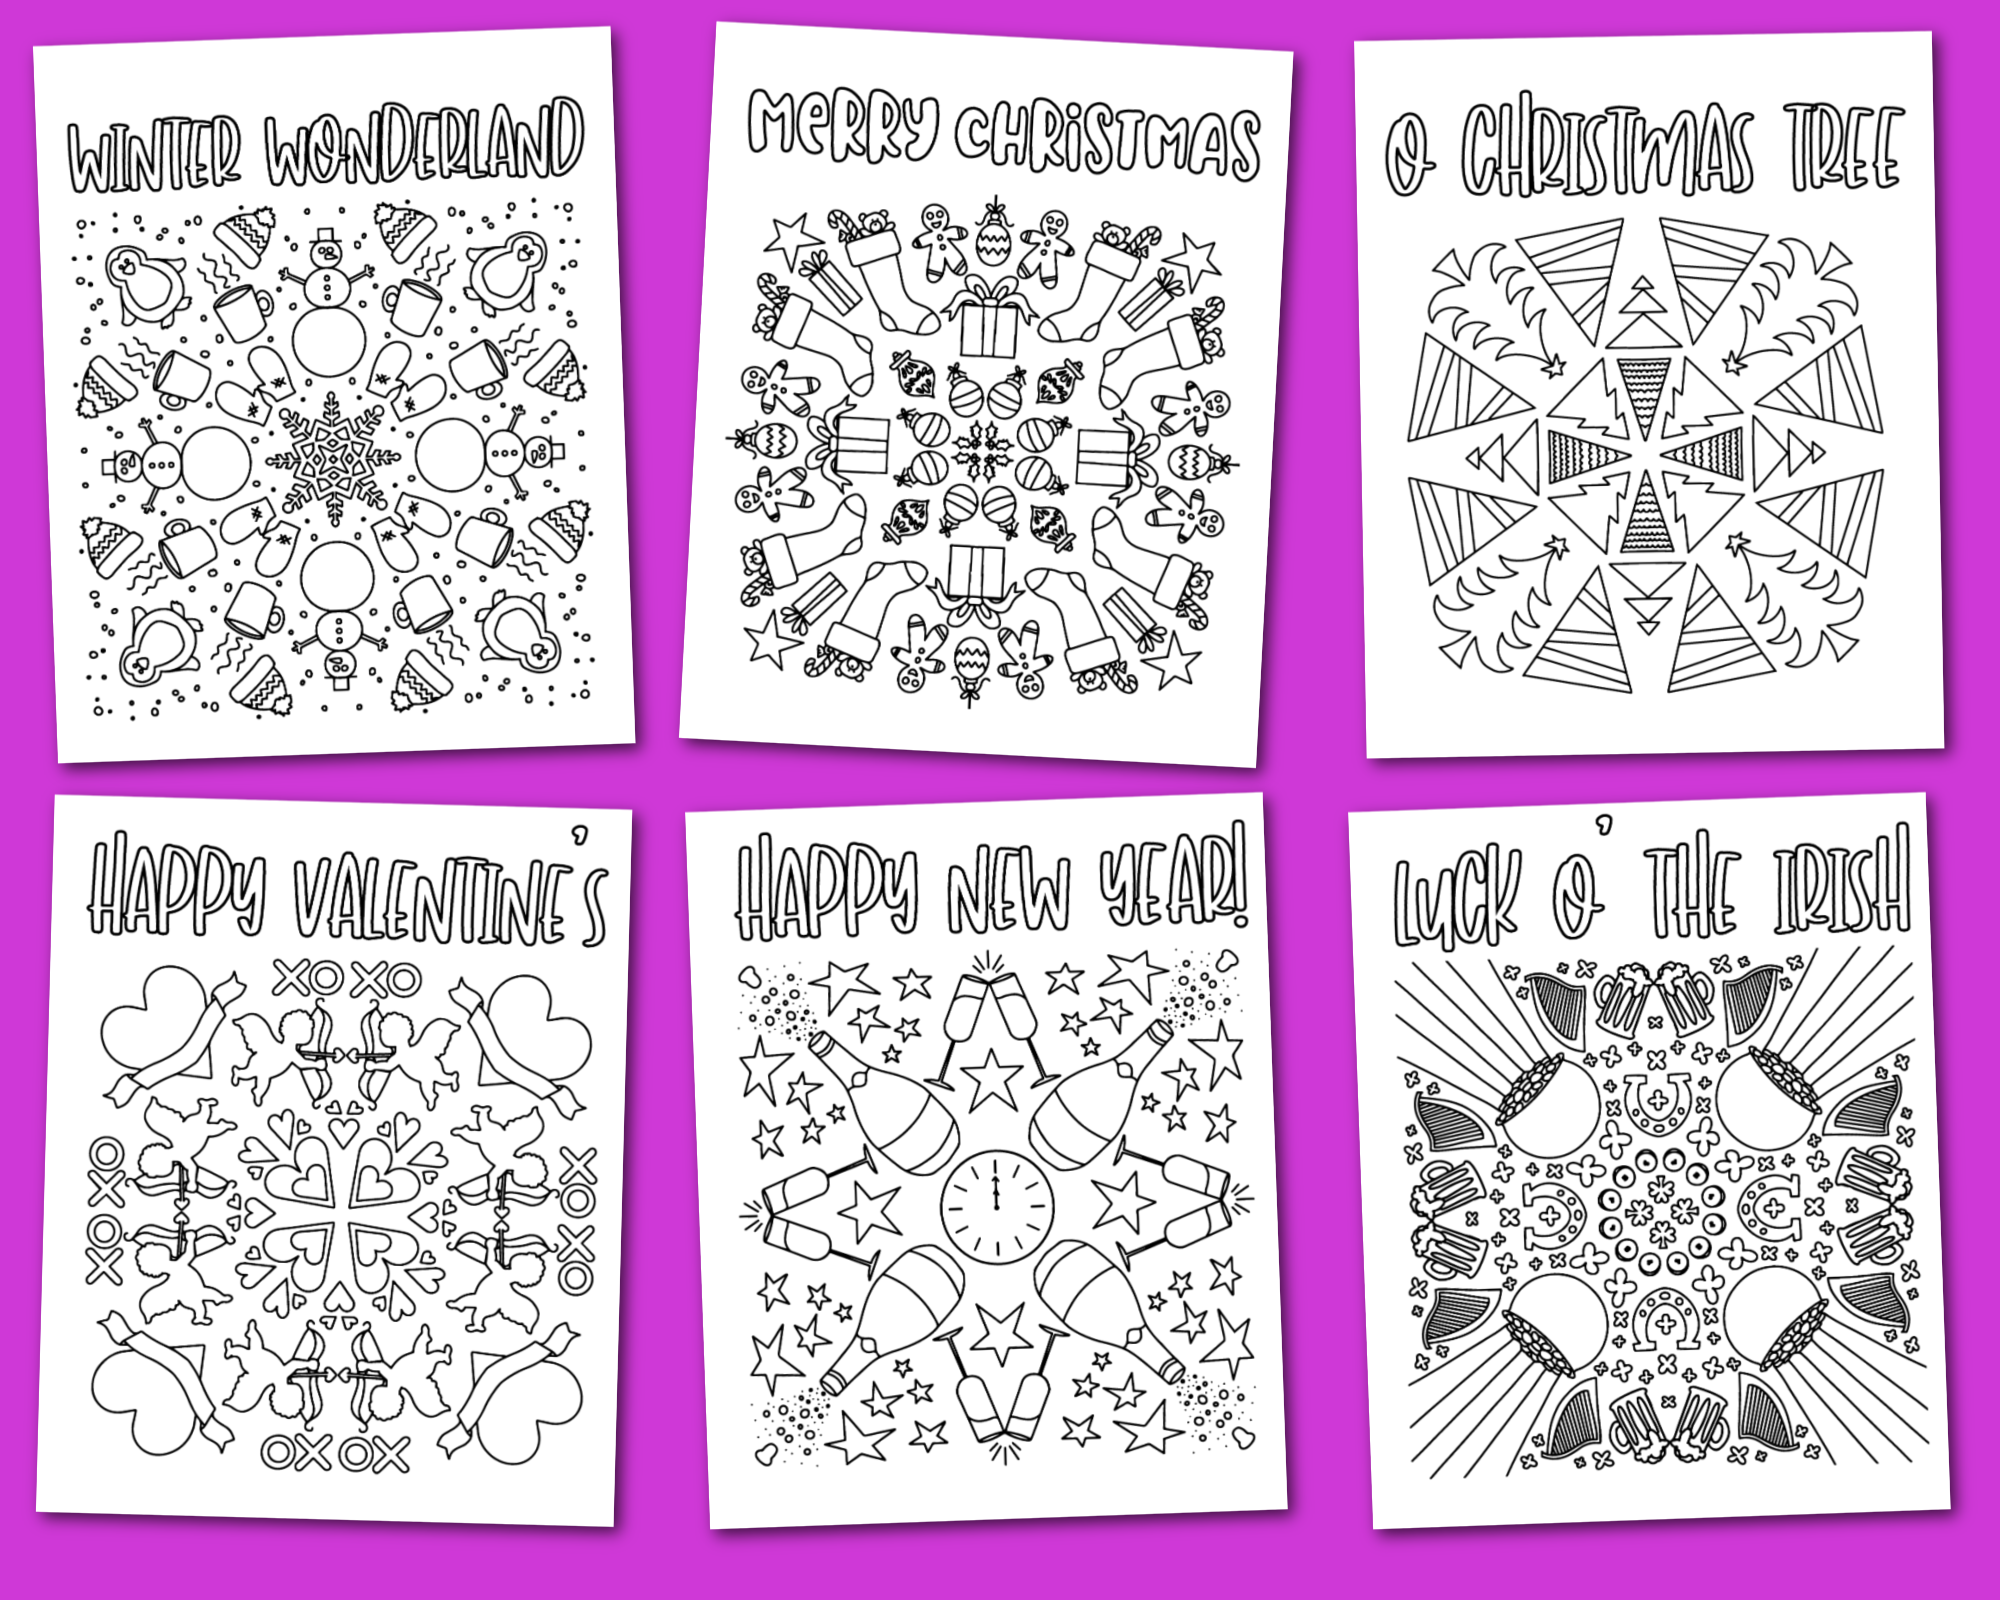 Coloring pages on a purple background